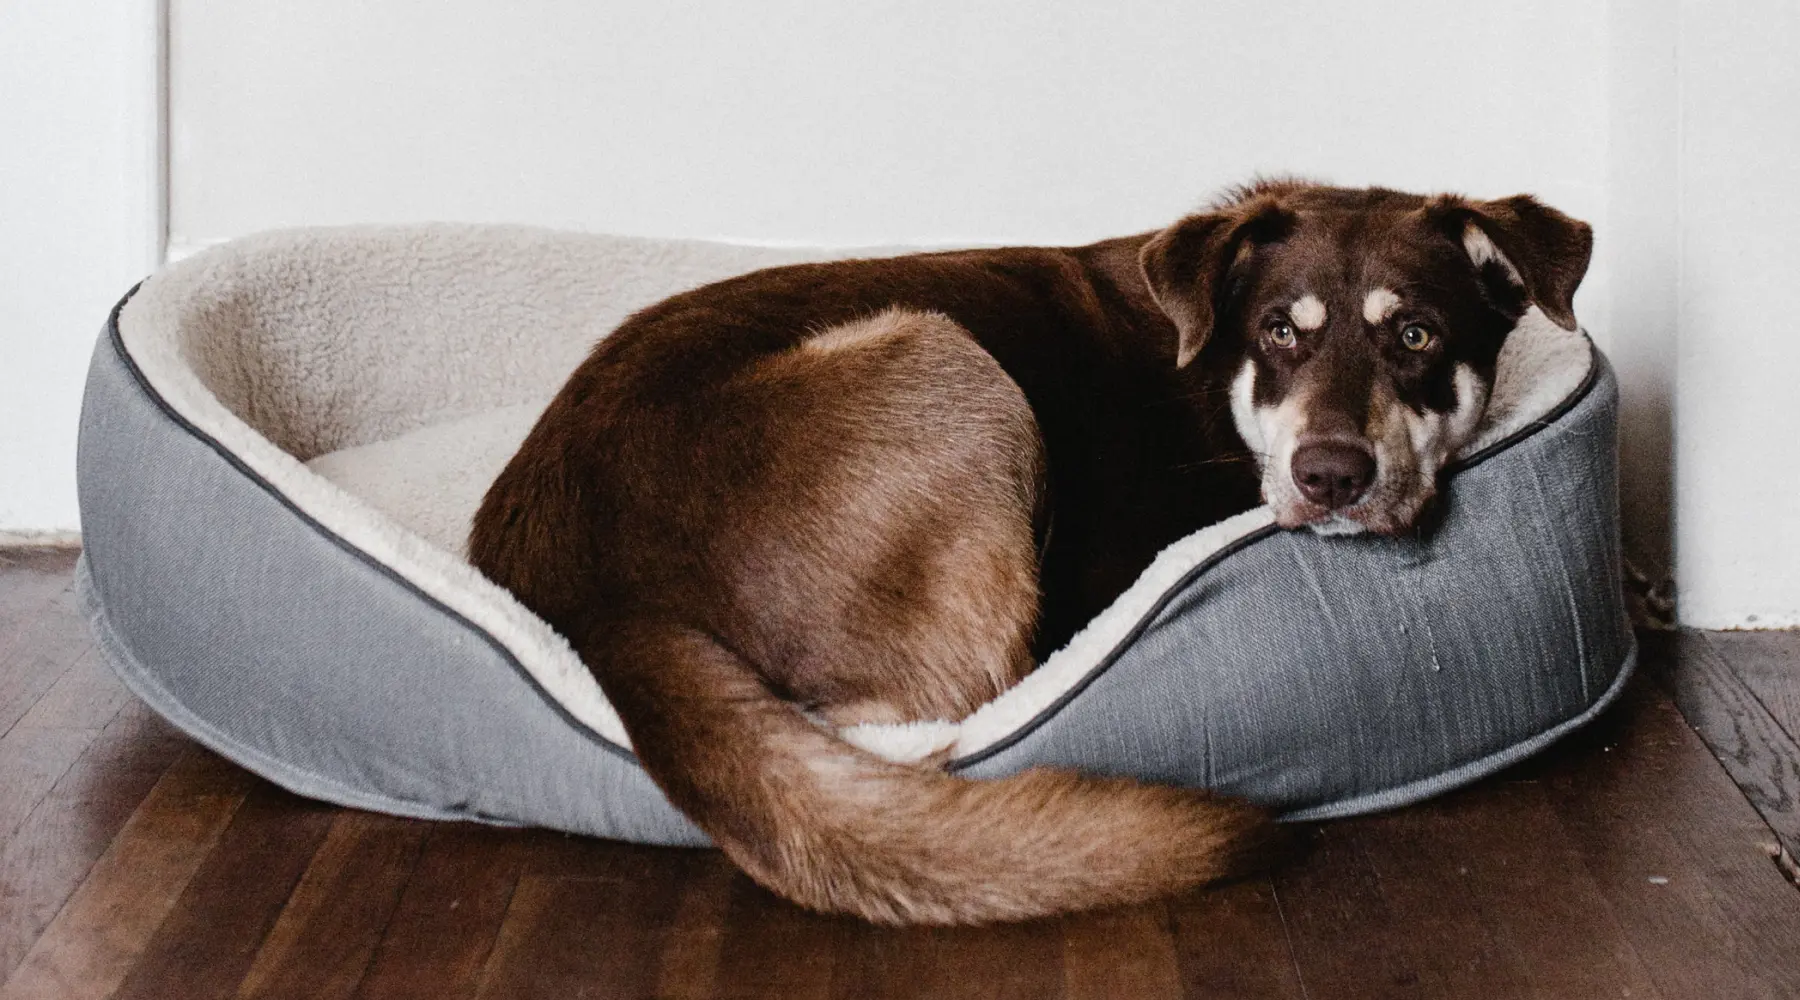 A cute large dog resting in a dog bed